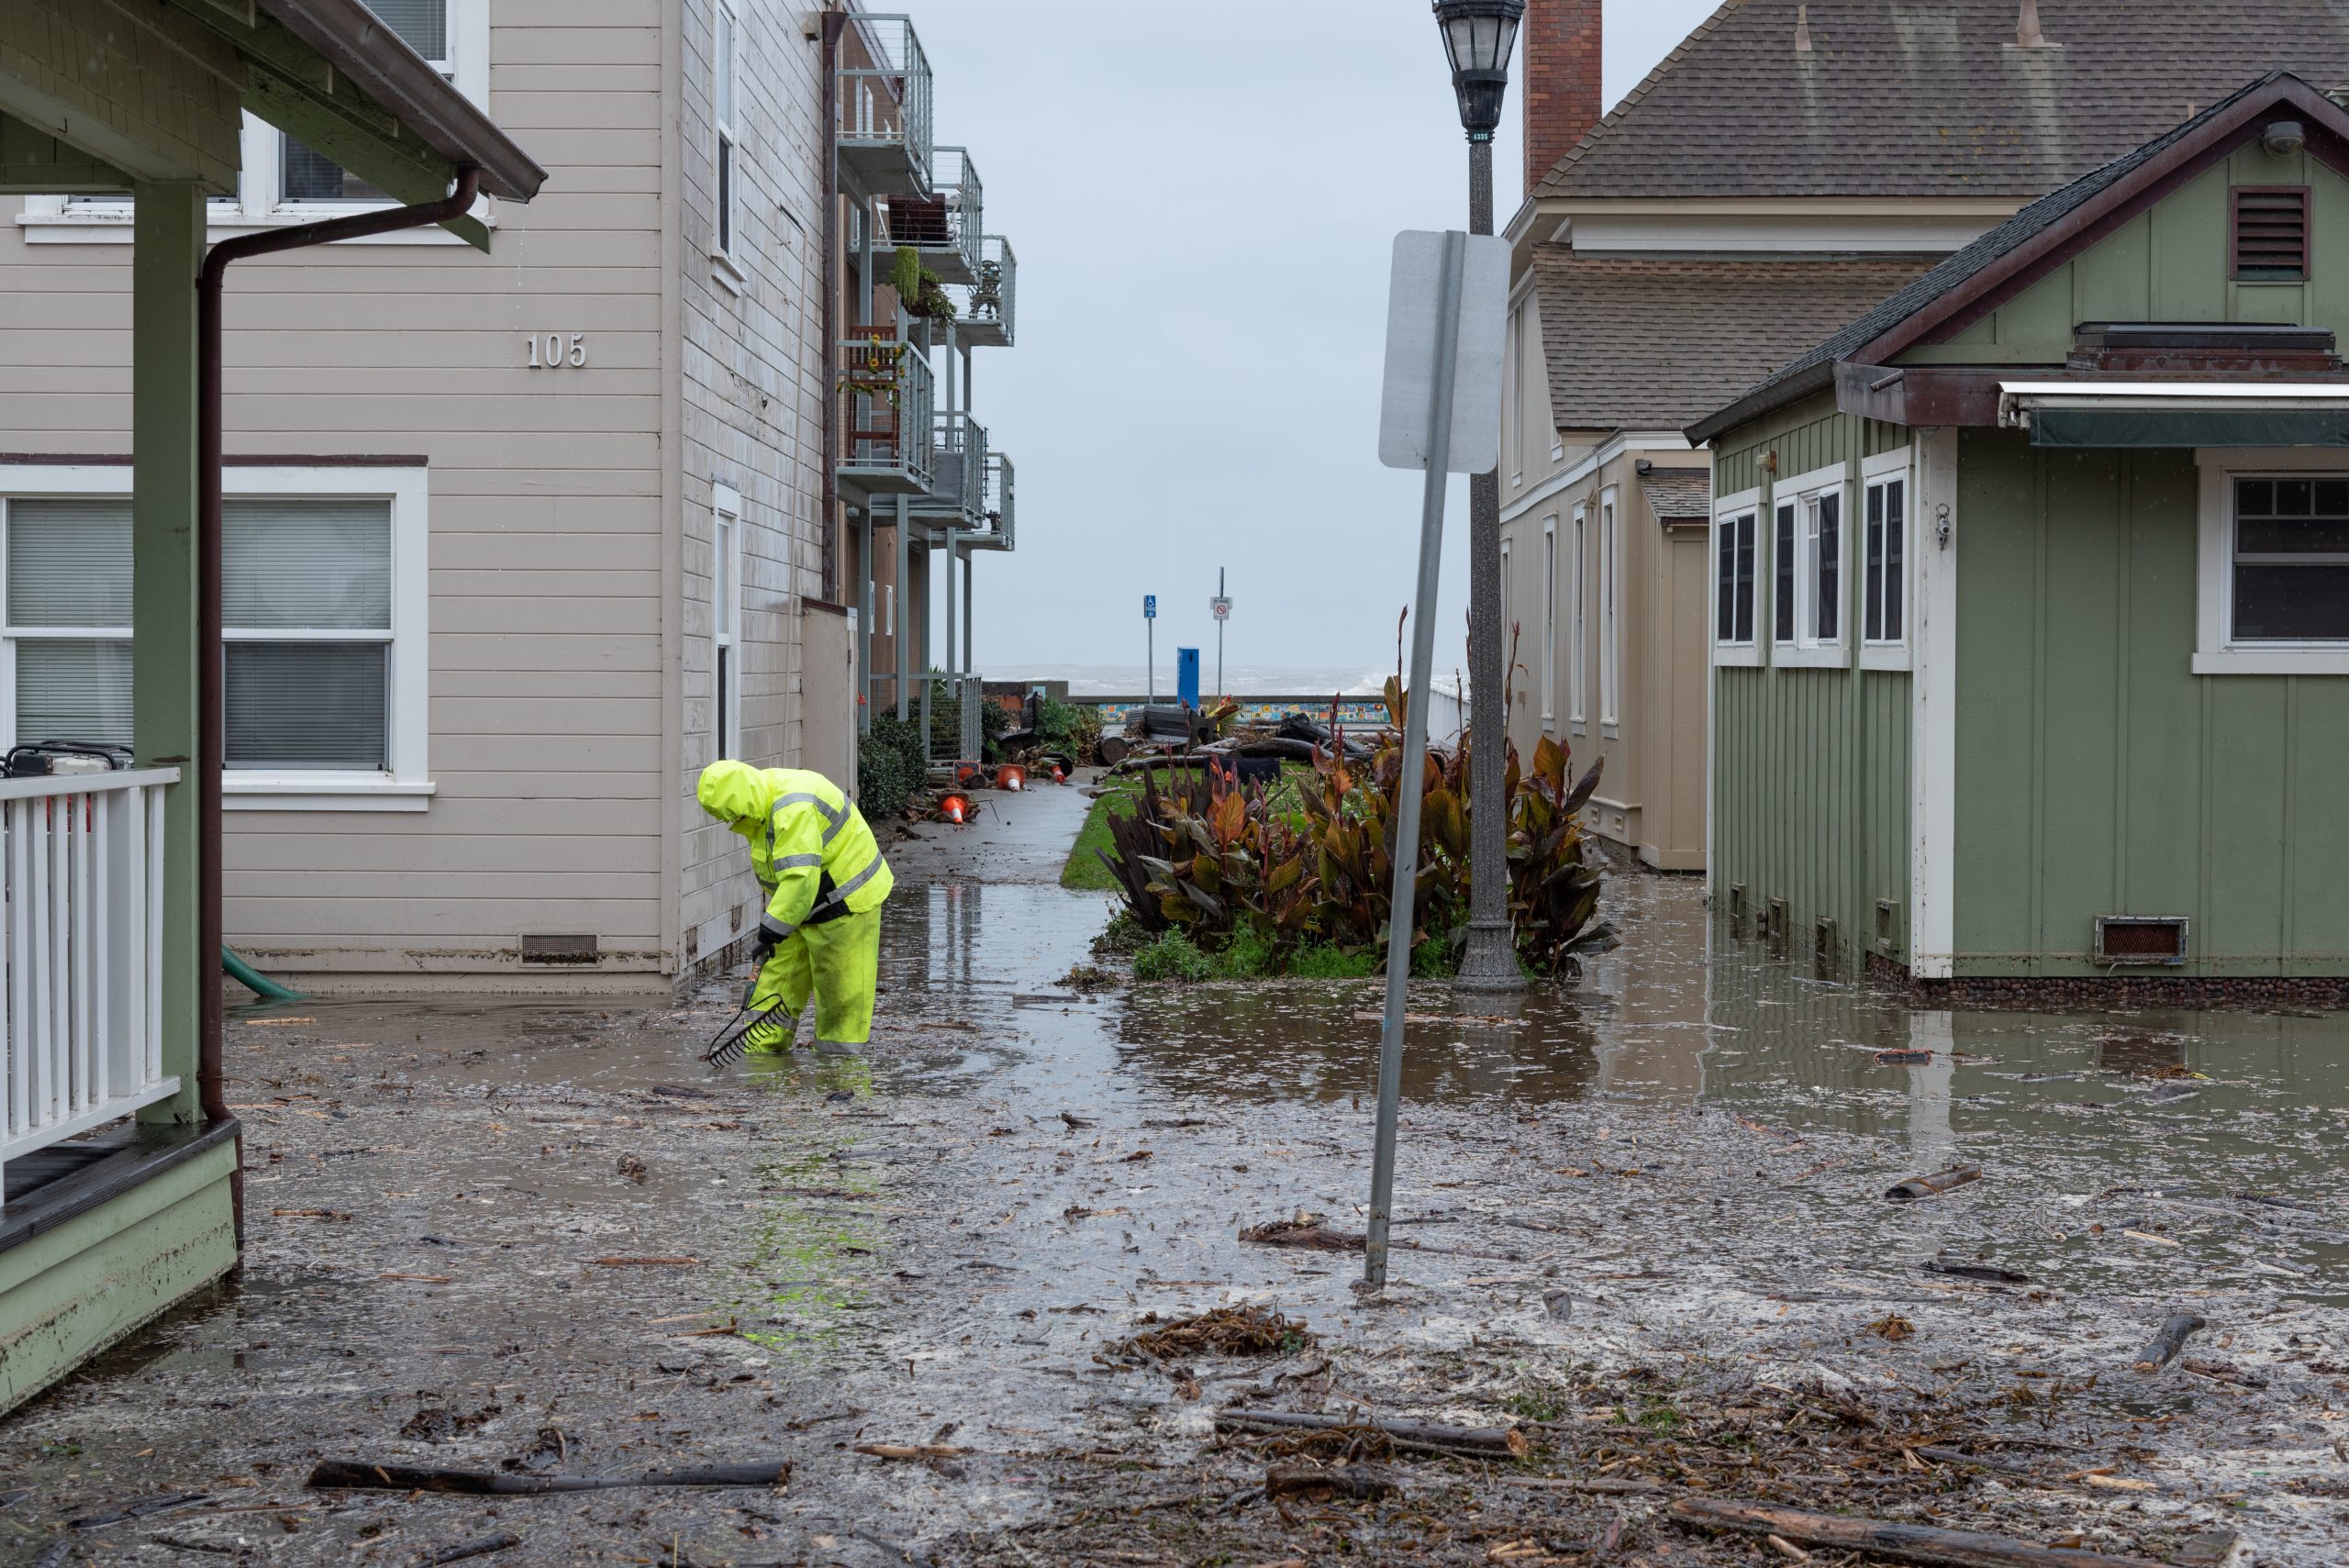 workers clean up a flooded road in a residential area